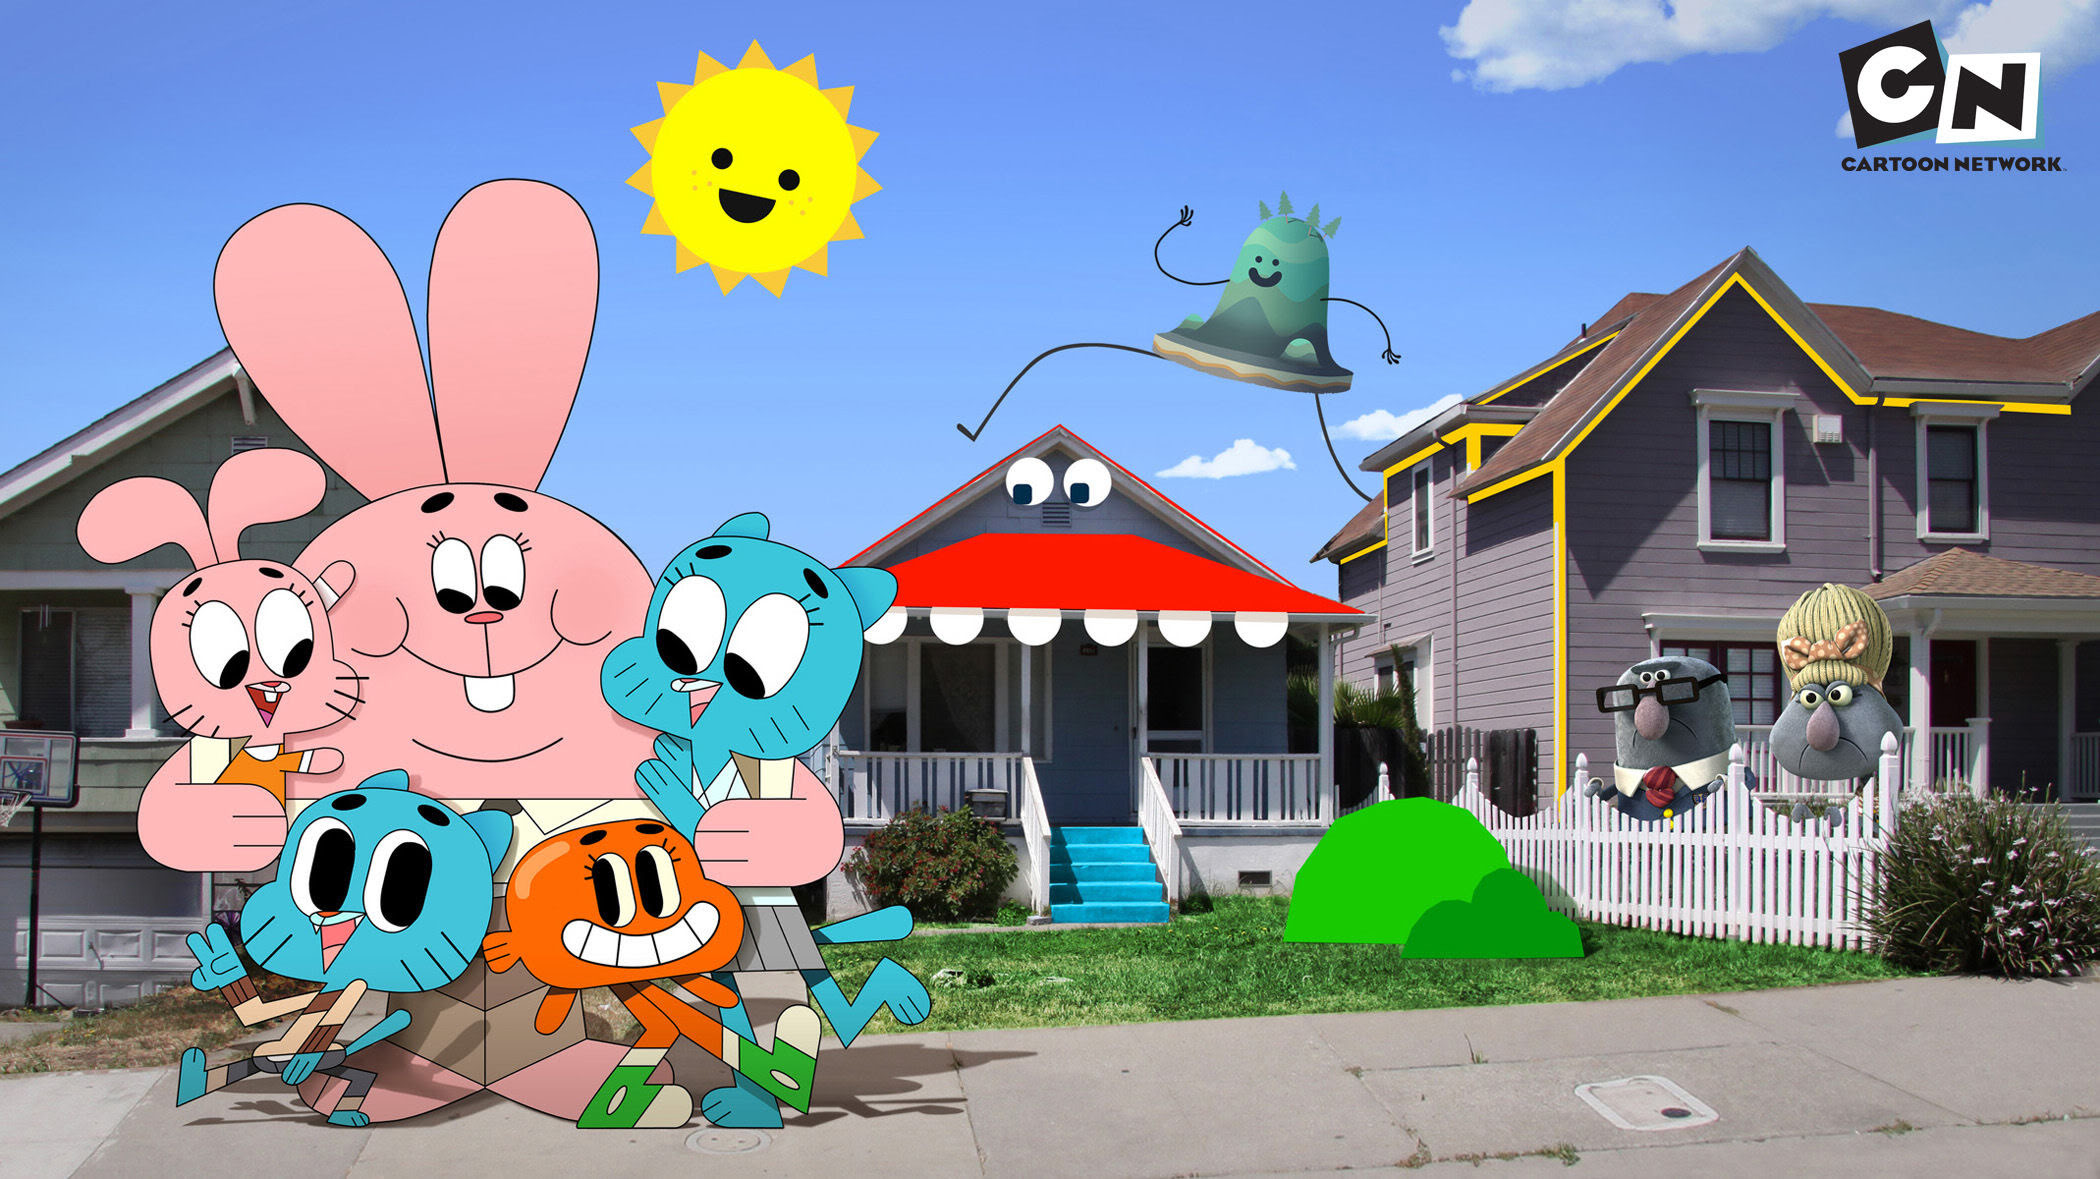 Amazing World Of Gumball. (Anime version)  The amazing world of gumball,  Anime vs cartoon, World of gumball